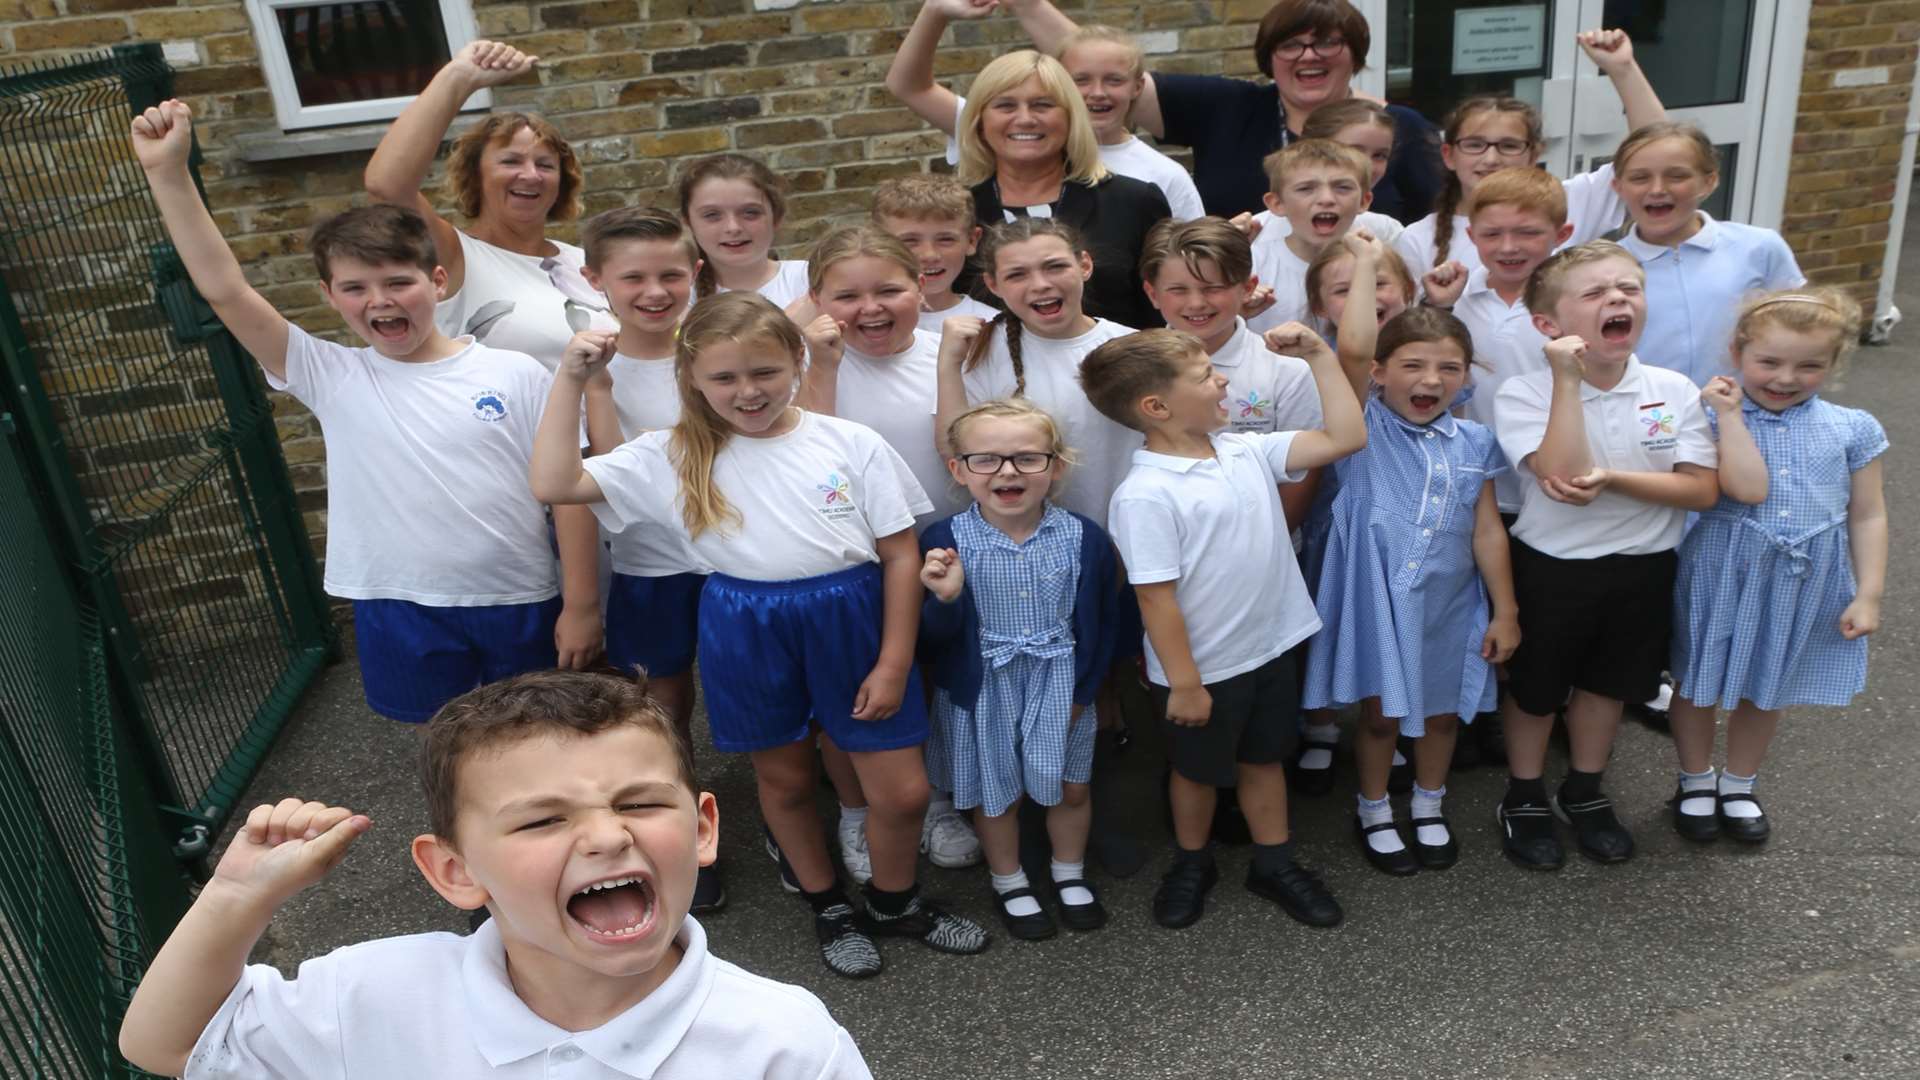 From left, Hadyn, five, with Mrs Ware, Executive Principal, Mrs Hudson, Principal and Mrs Stewart, Assistant Head celebrate with some of the children from Bobbing Village School for receiving an Outstanding Ofsted Report in all areas.